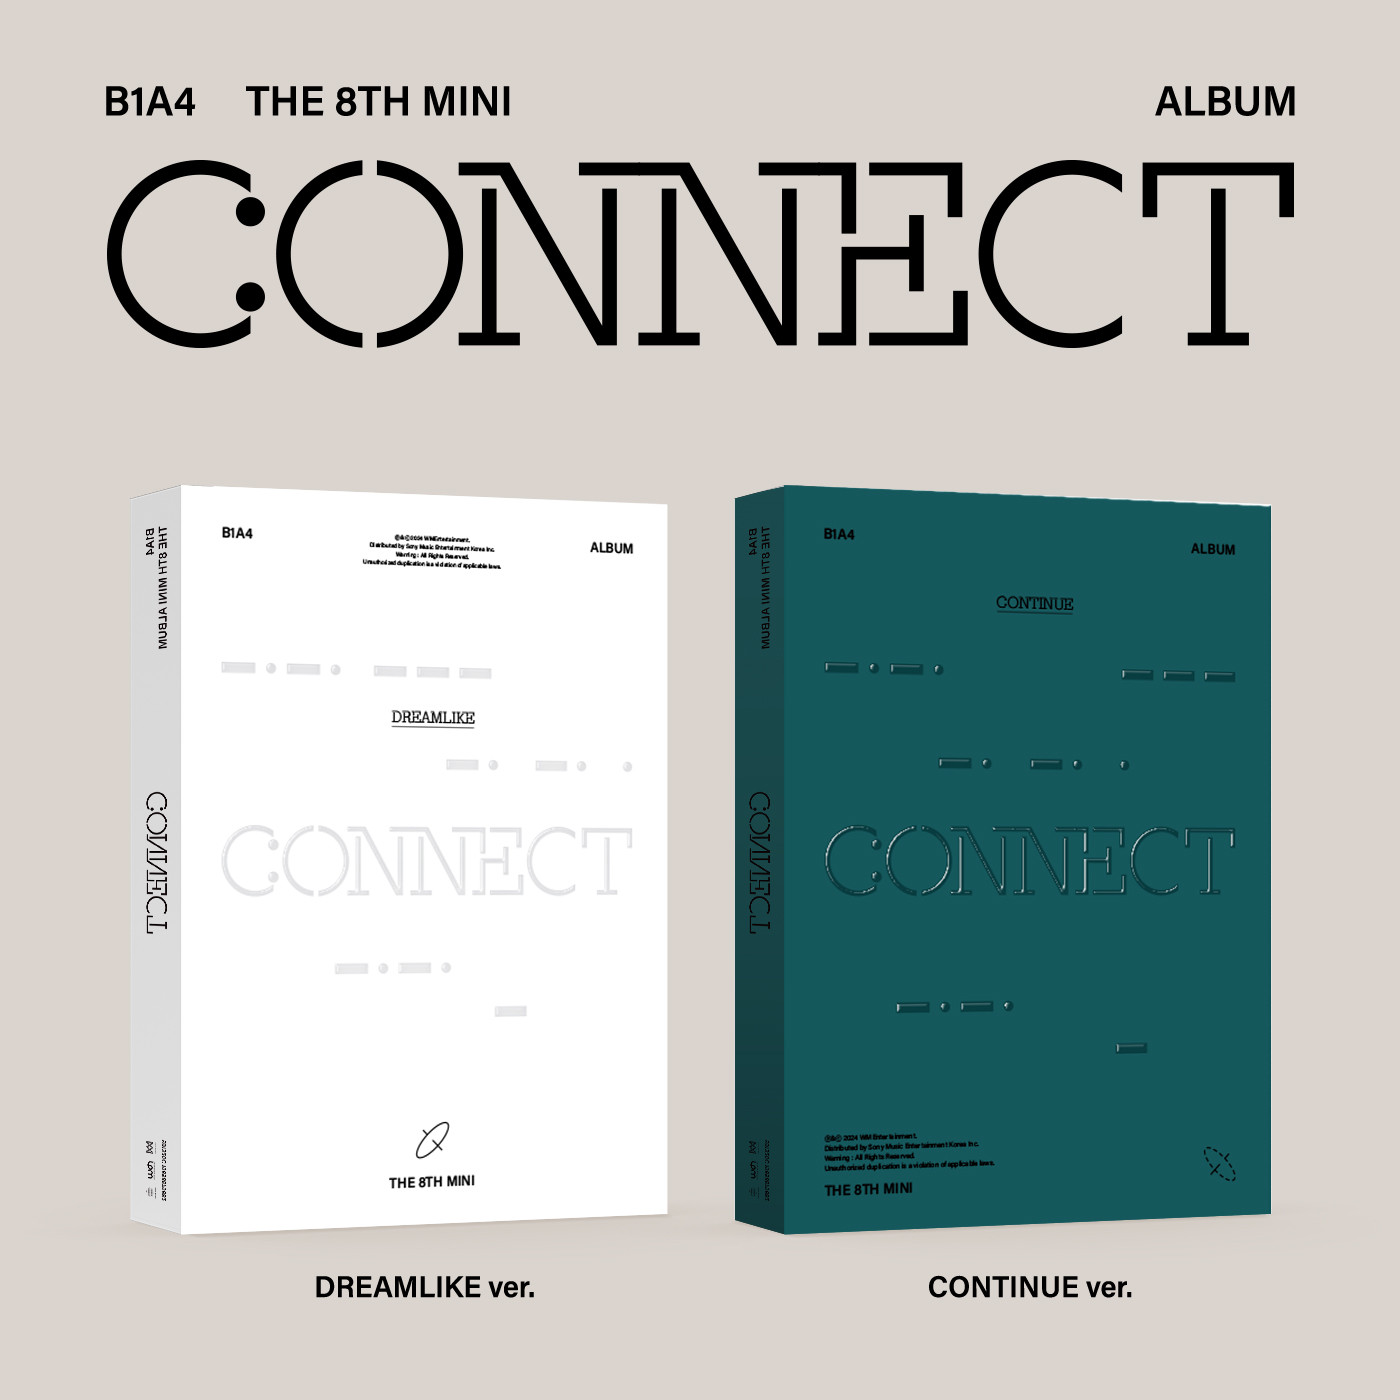 [B1A4] CONNECT (1 random out of 2 covers)